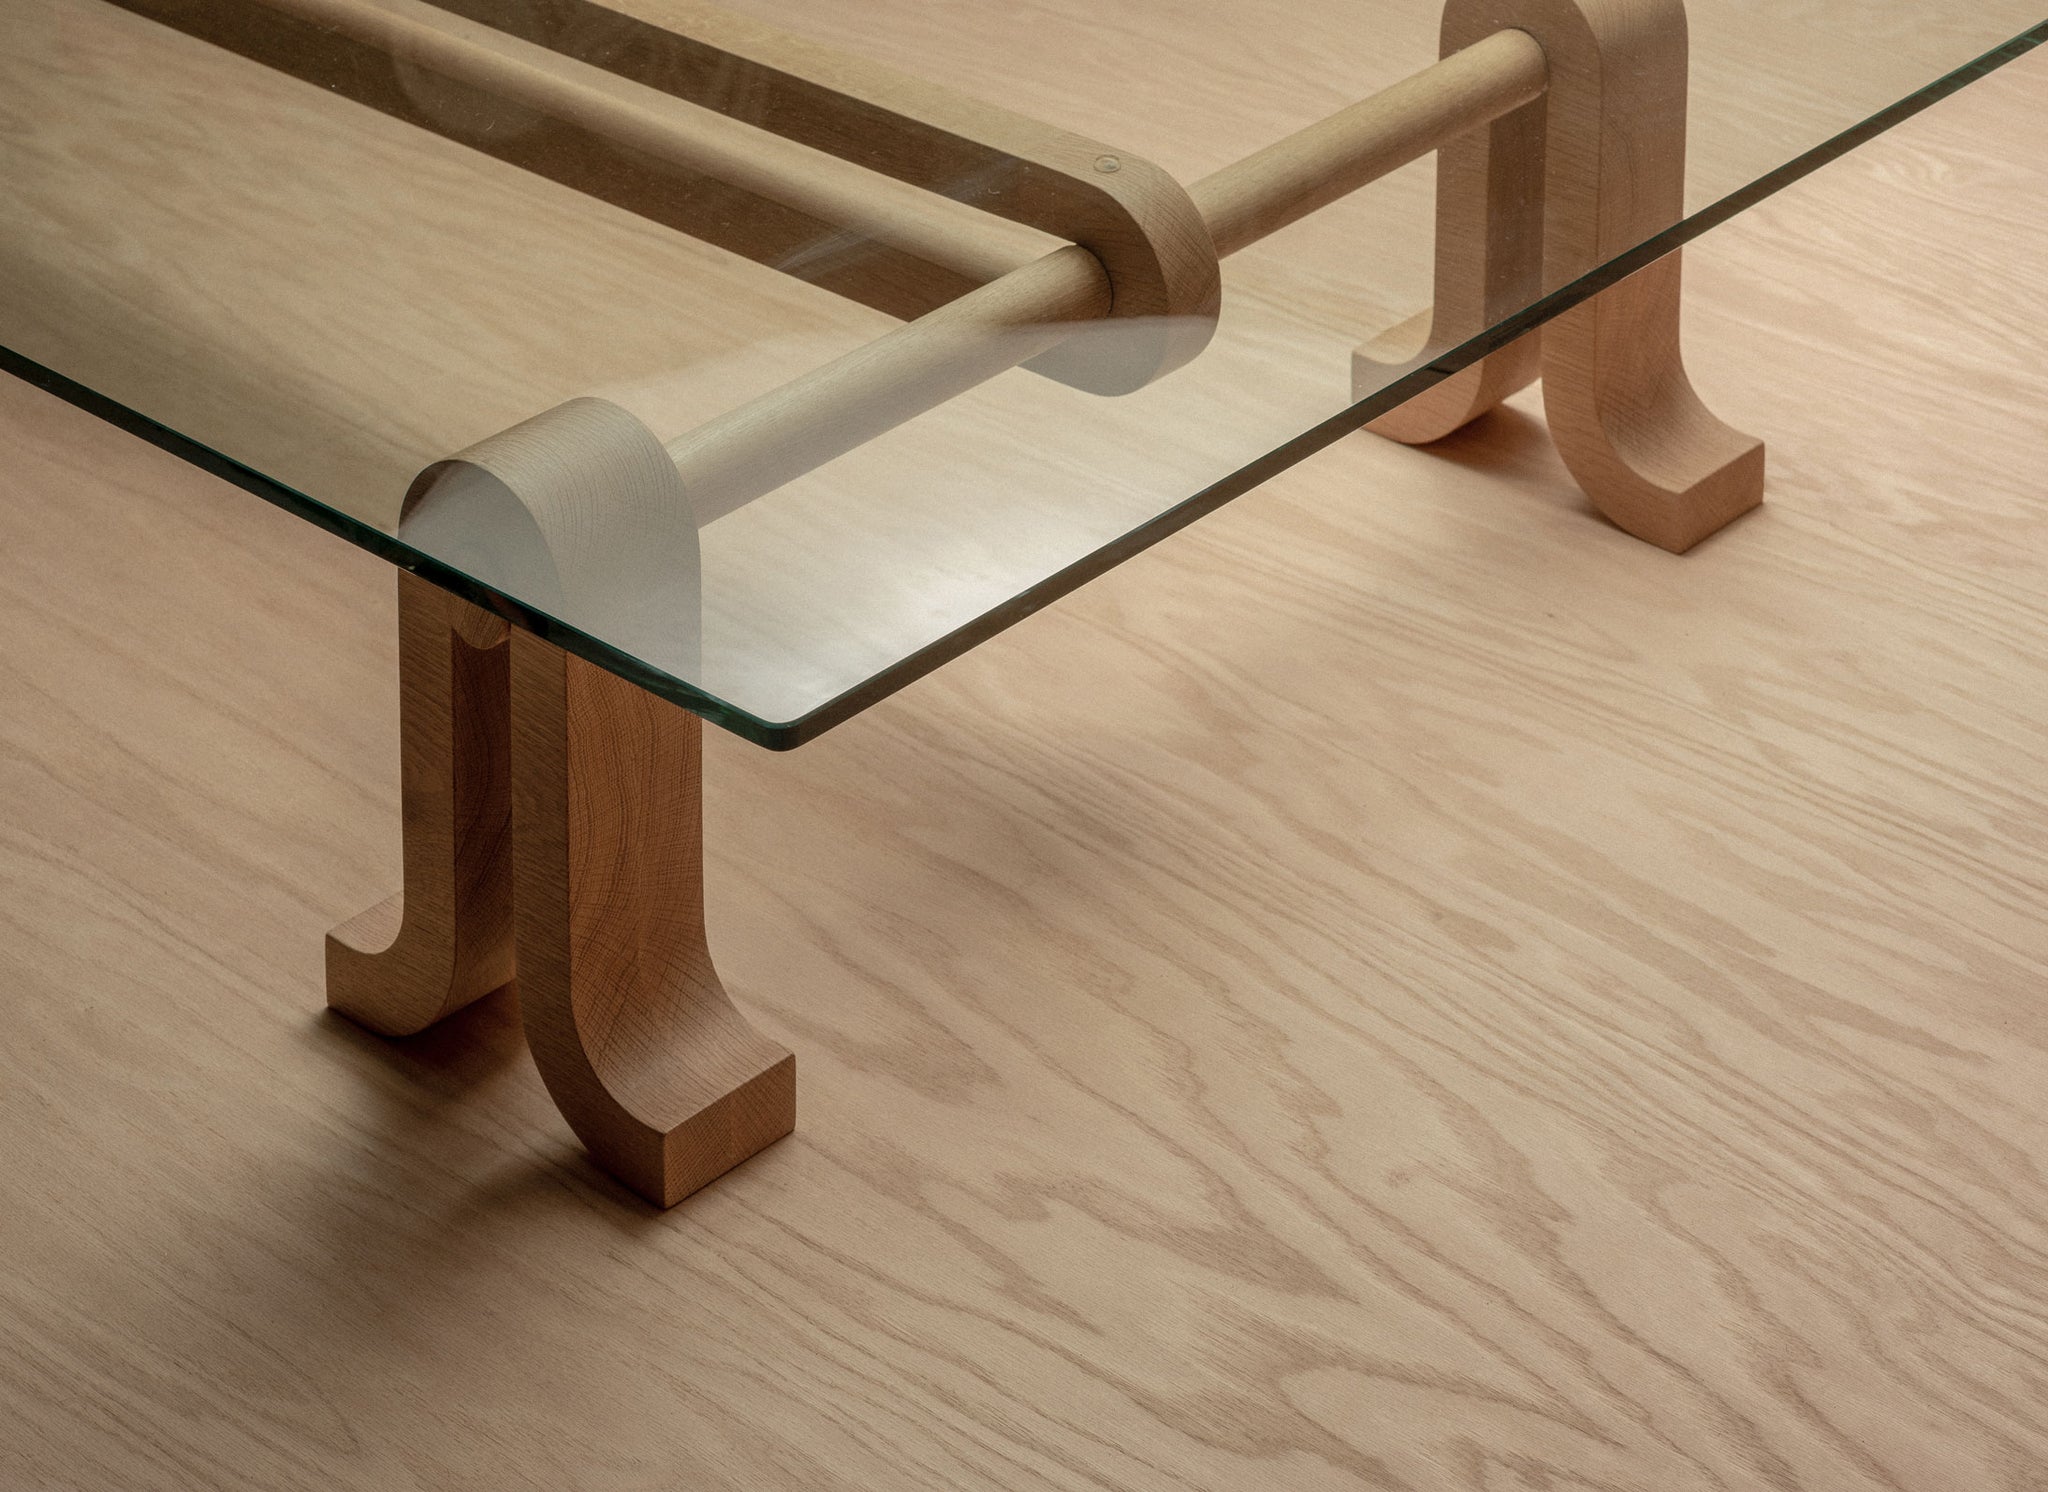 Close-up of the Loop Table in a natural finish on a plywood floor